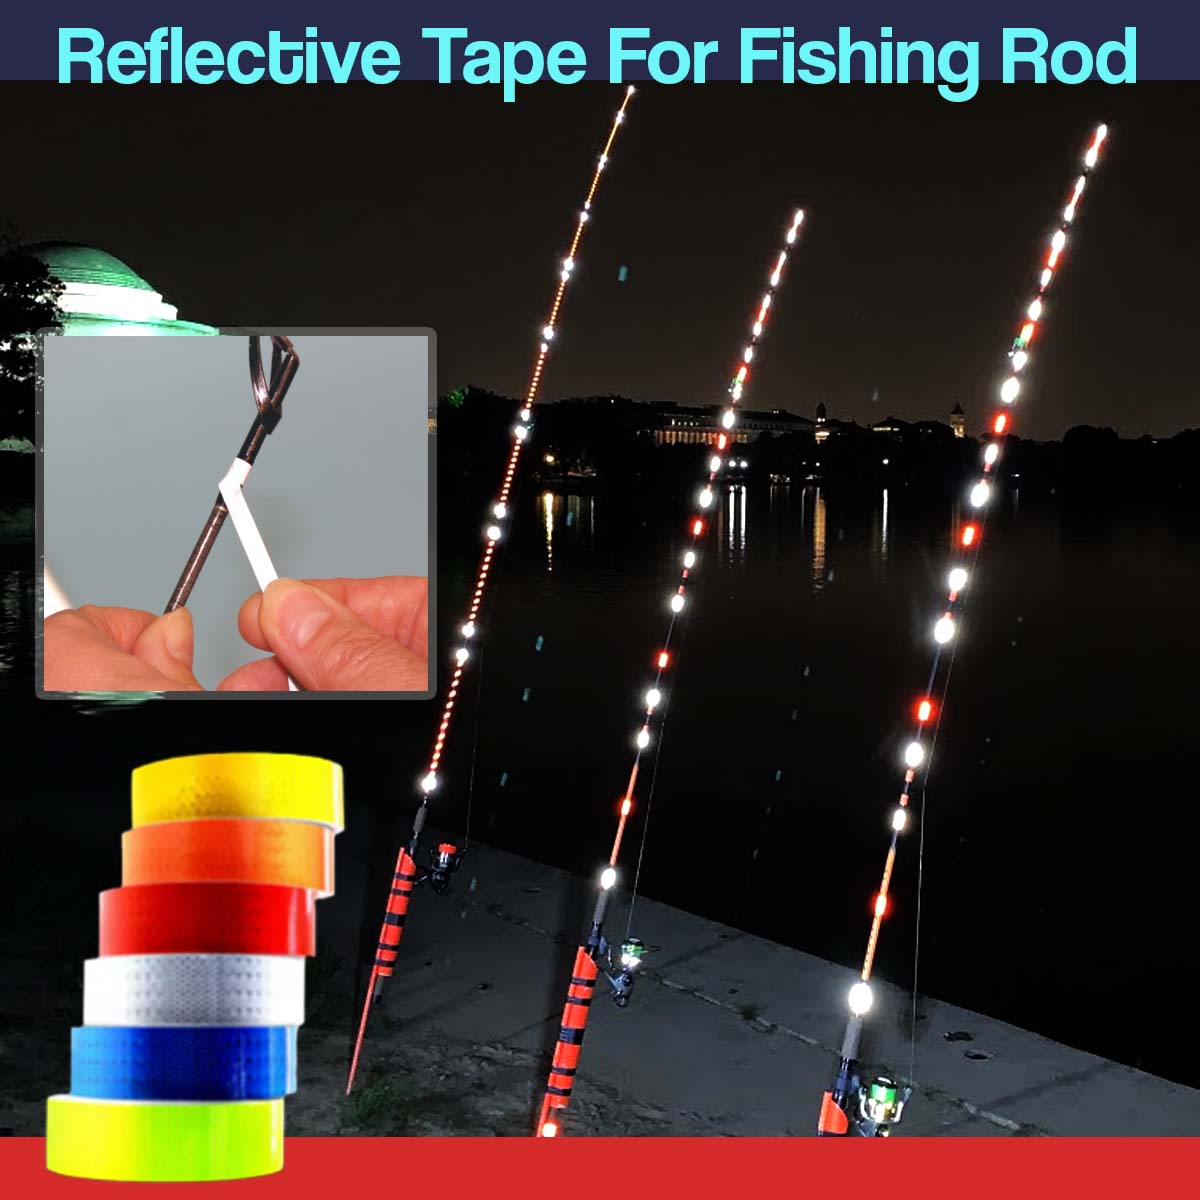 Reflective Tape For Fishing Rod - Savoury Eve